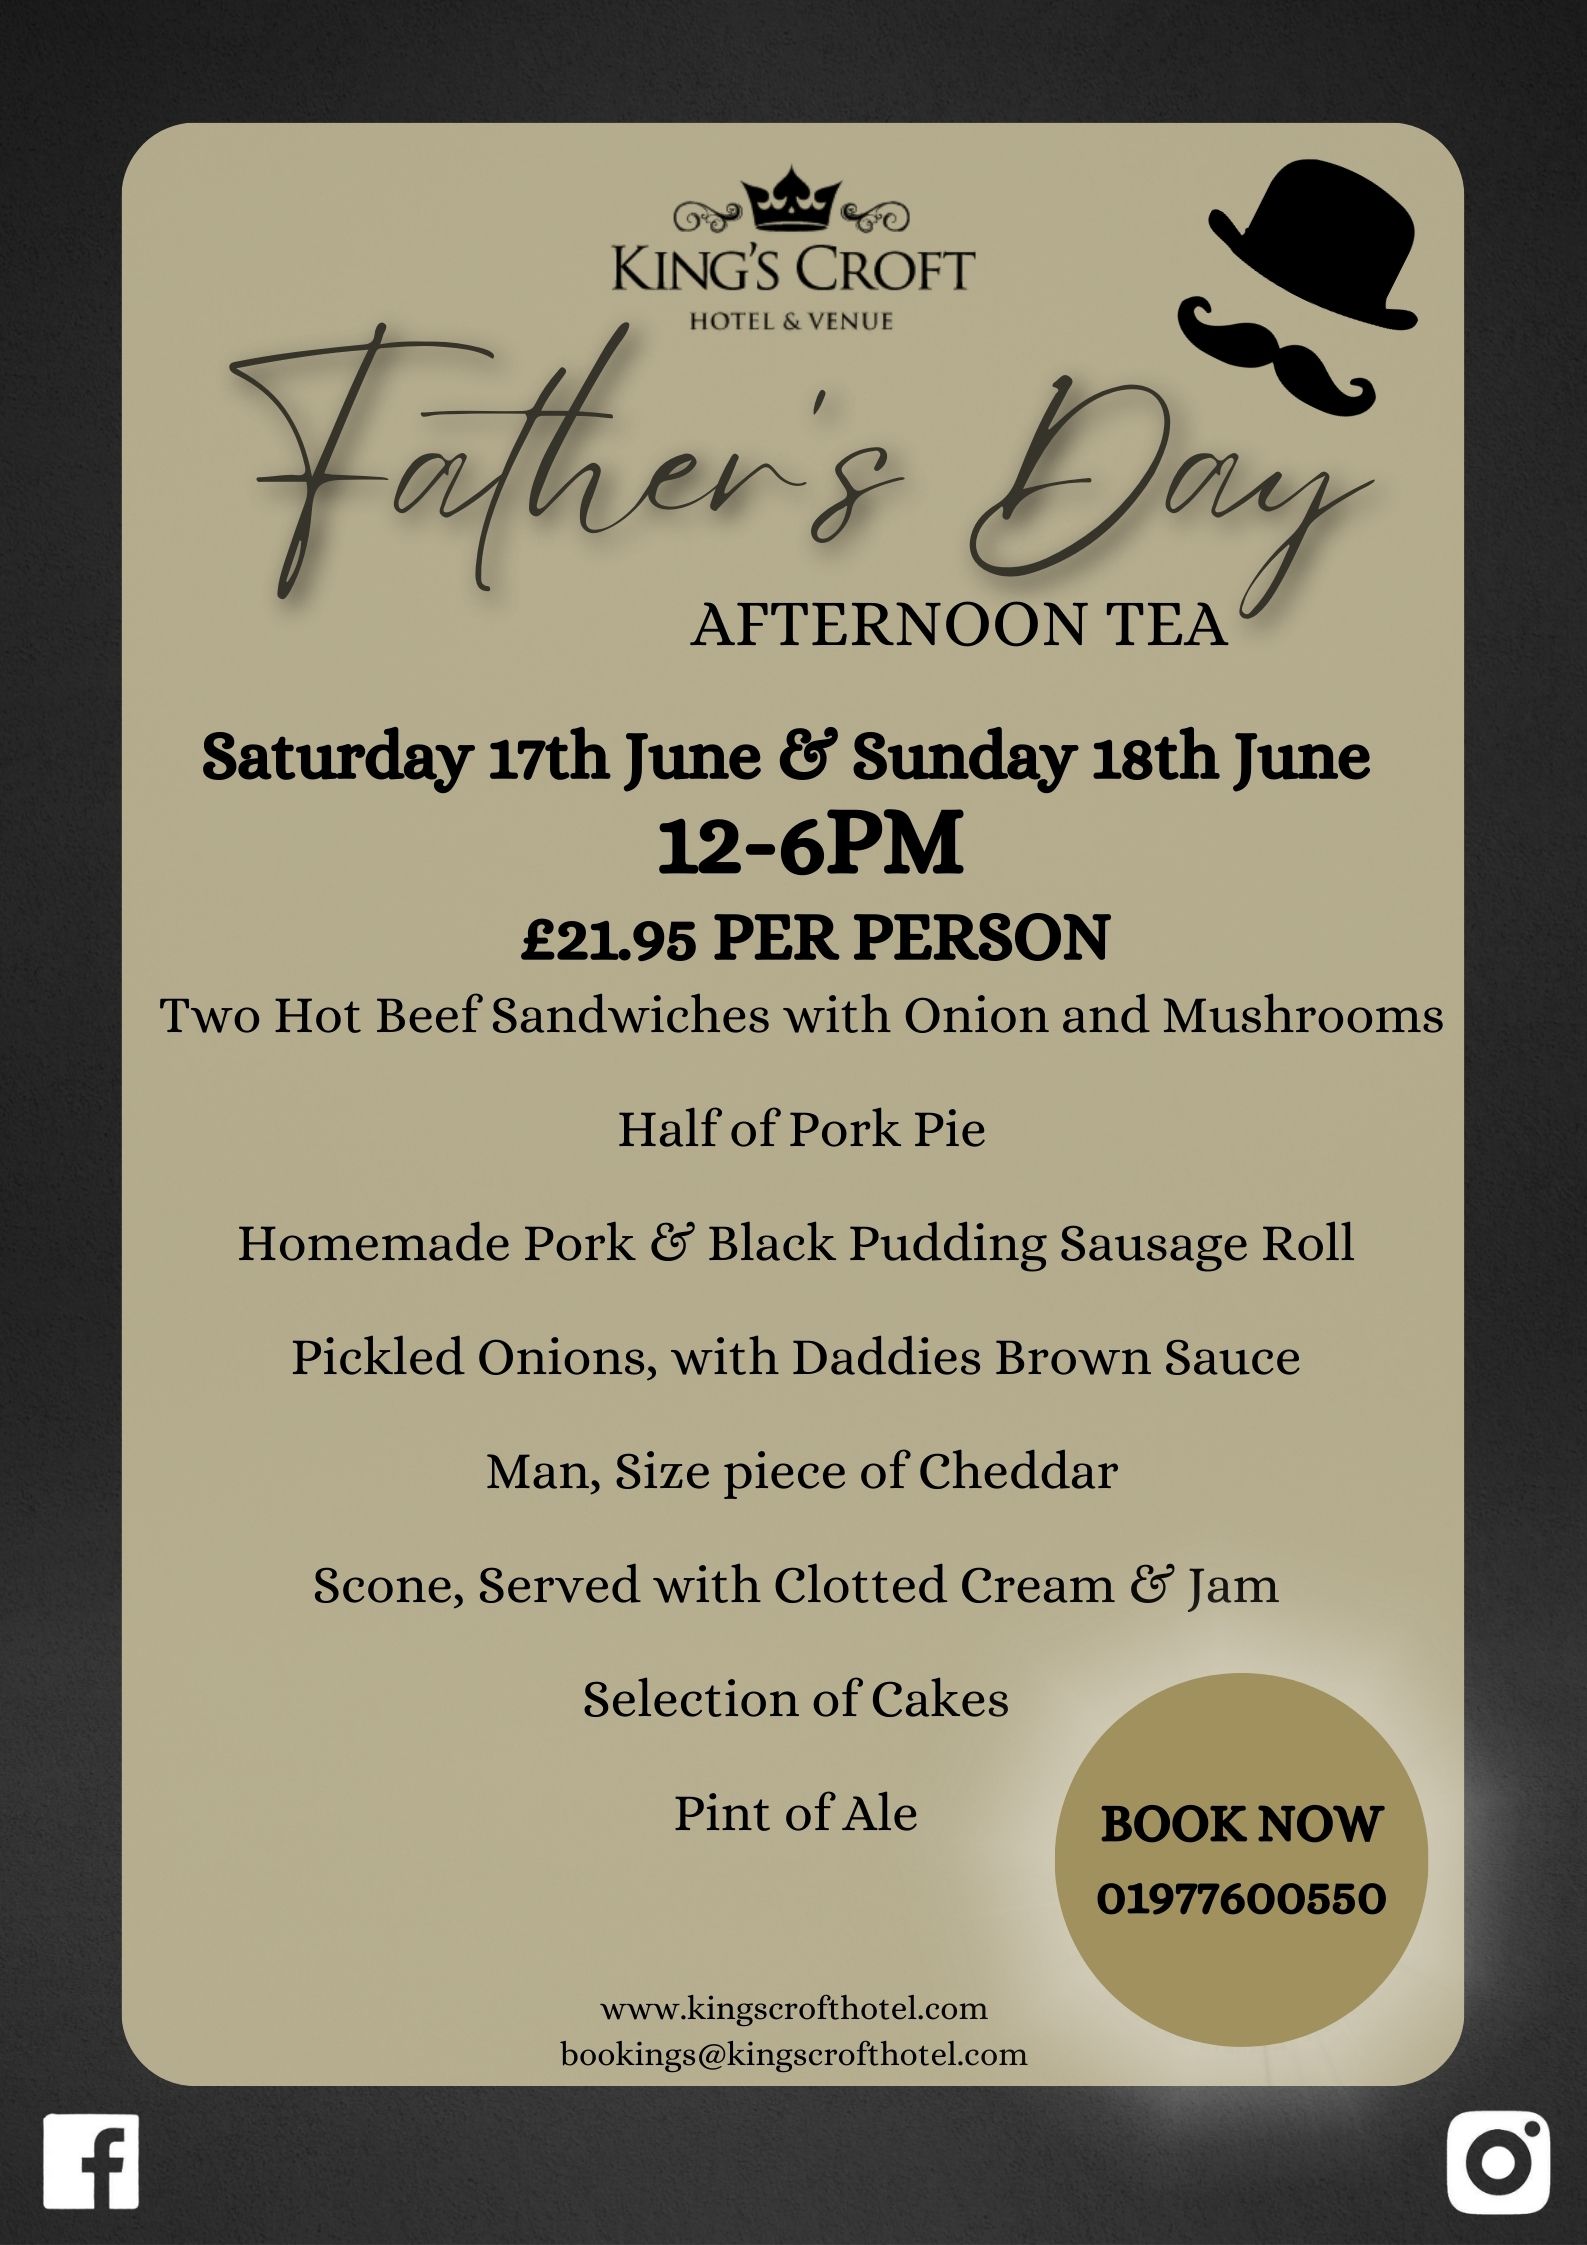 Sunday 18th June - Father's Day Afternoon Tea